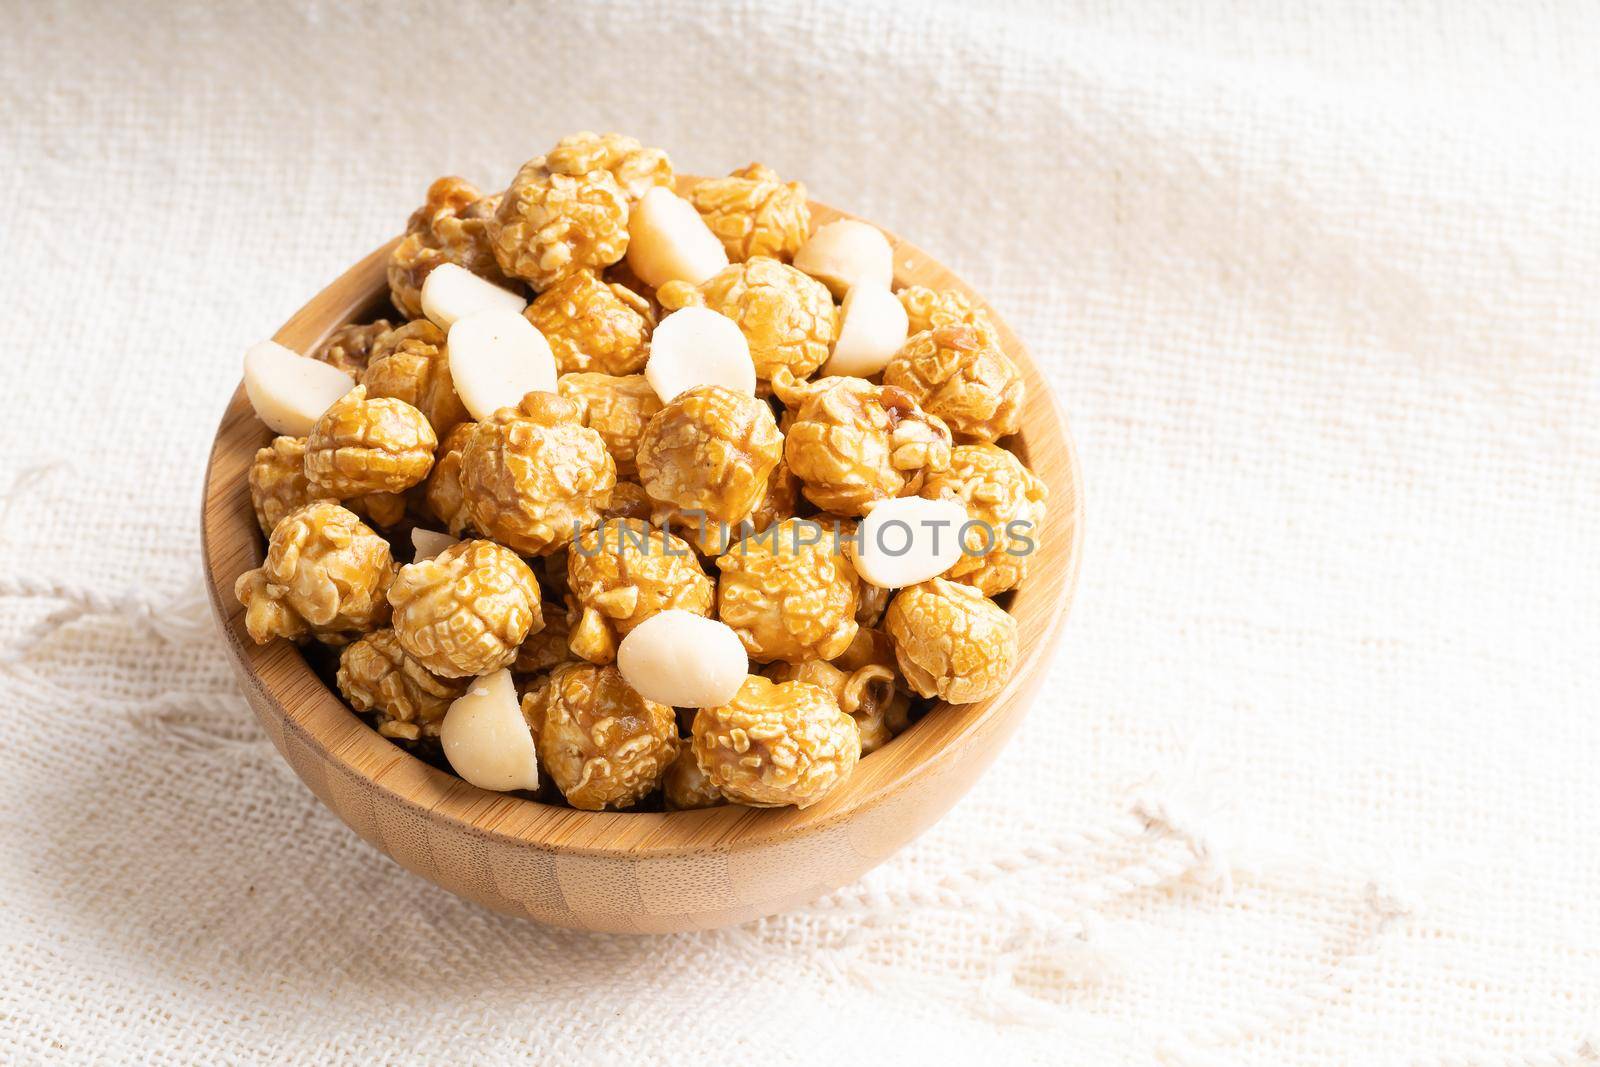 Caramel popcorn with macadamia nut in bamboo wooden bowl by smuay